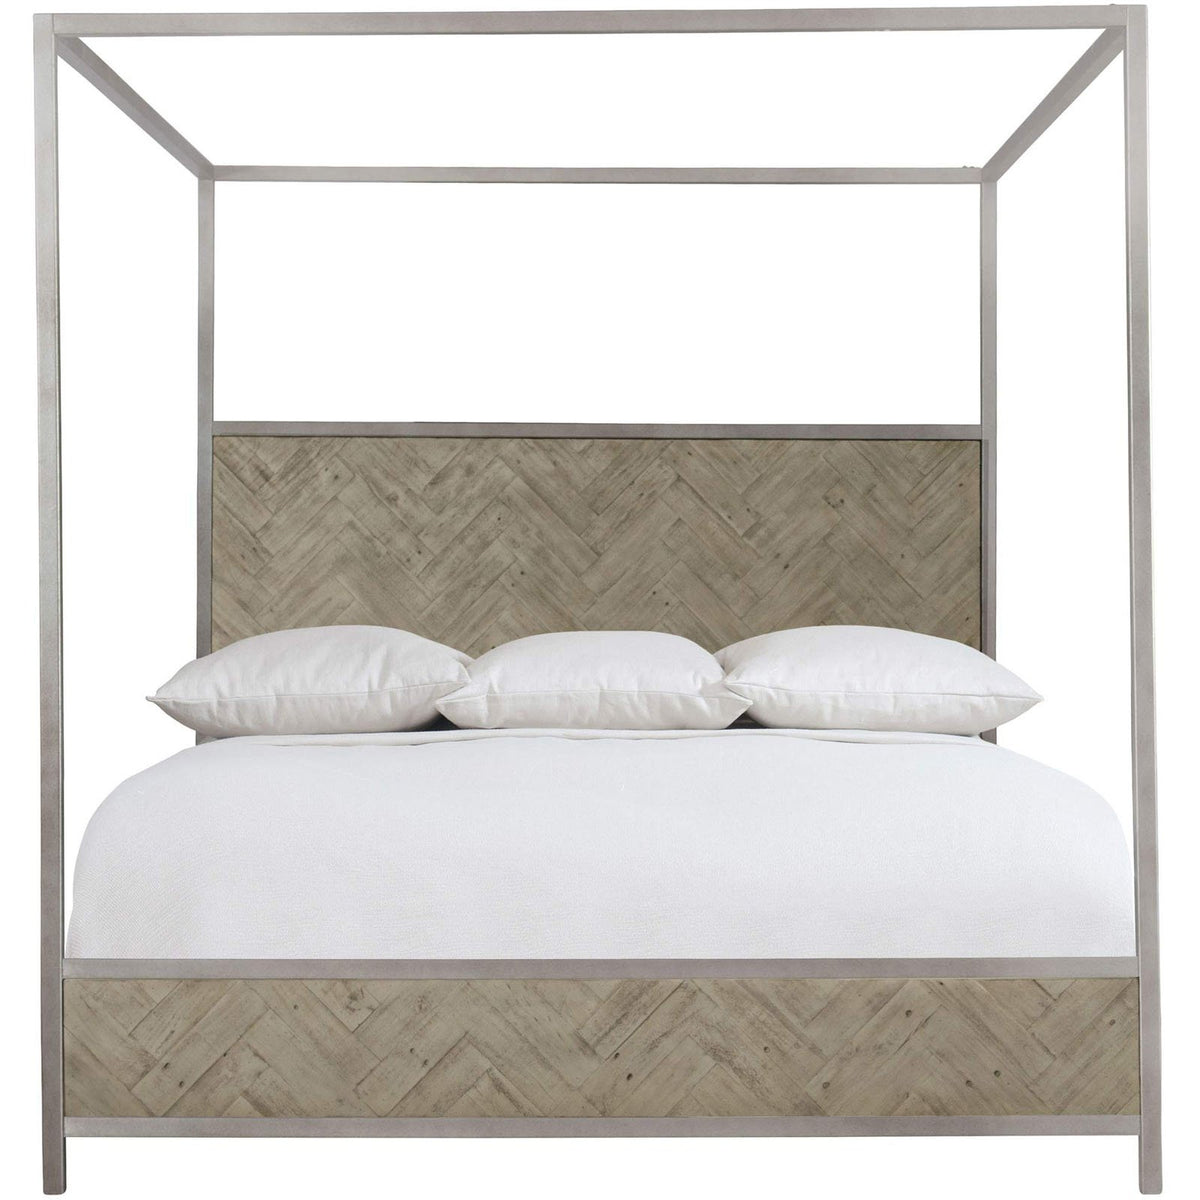 Milo Canopy Bed